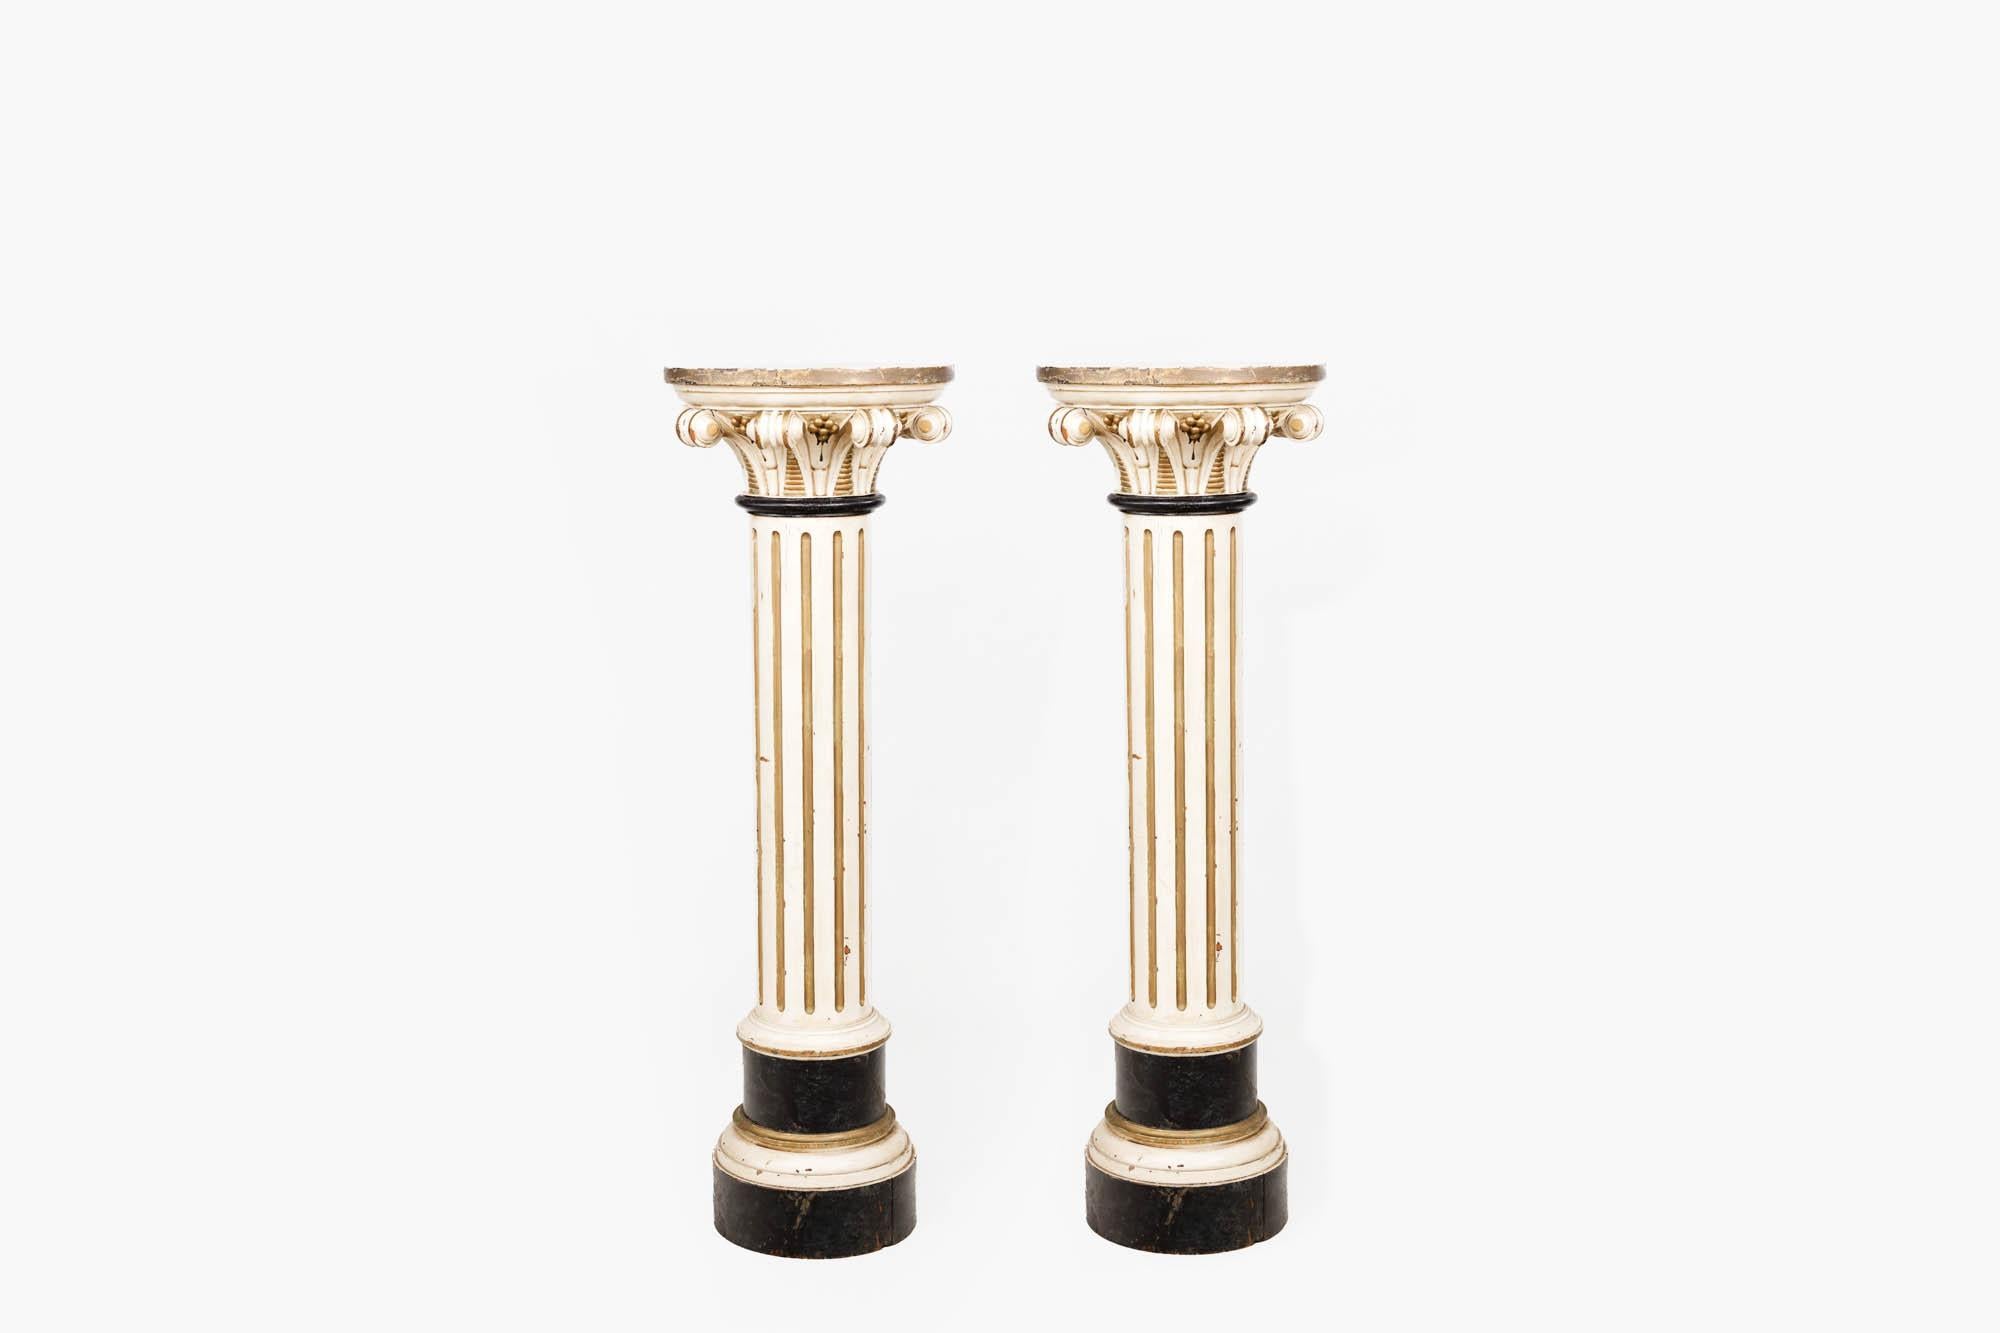 Pair 19th century painted pine Corinthian column pedestals in the classical Italian style with scrolling acanthus leaves and fluted detailing. The pair are finished in an off-white paint with parcel gilt highlights.